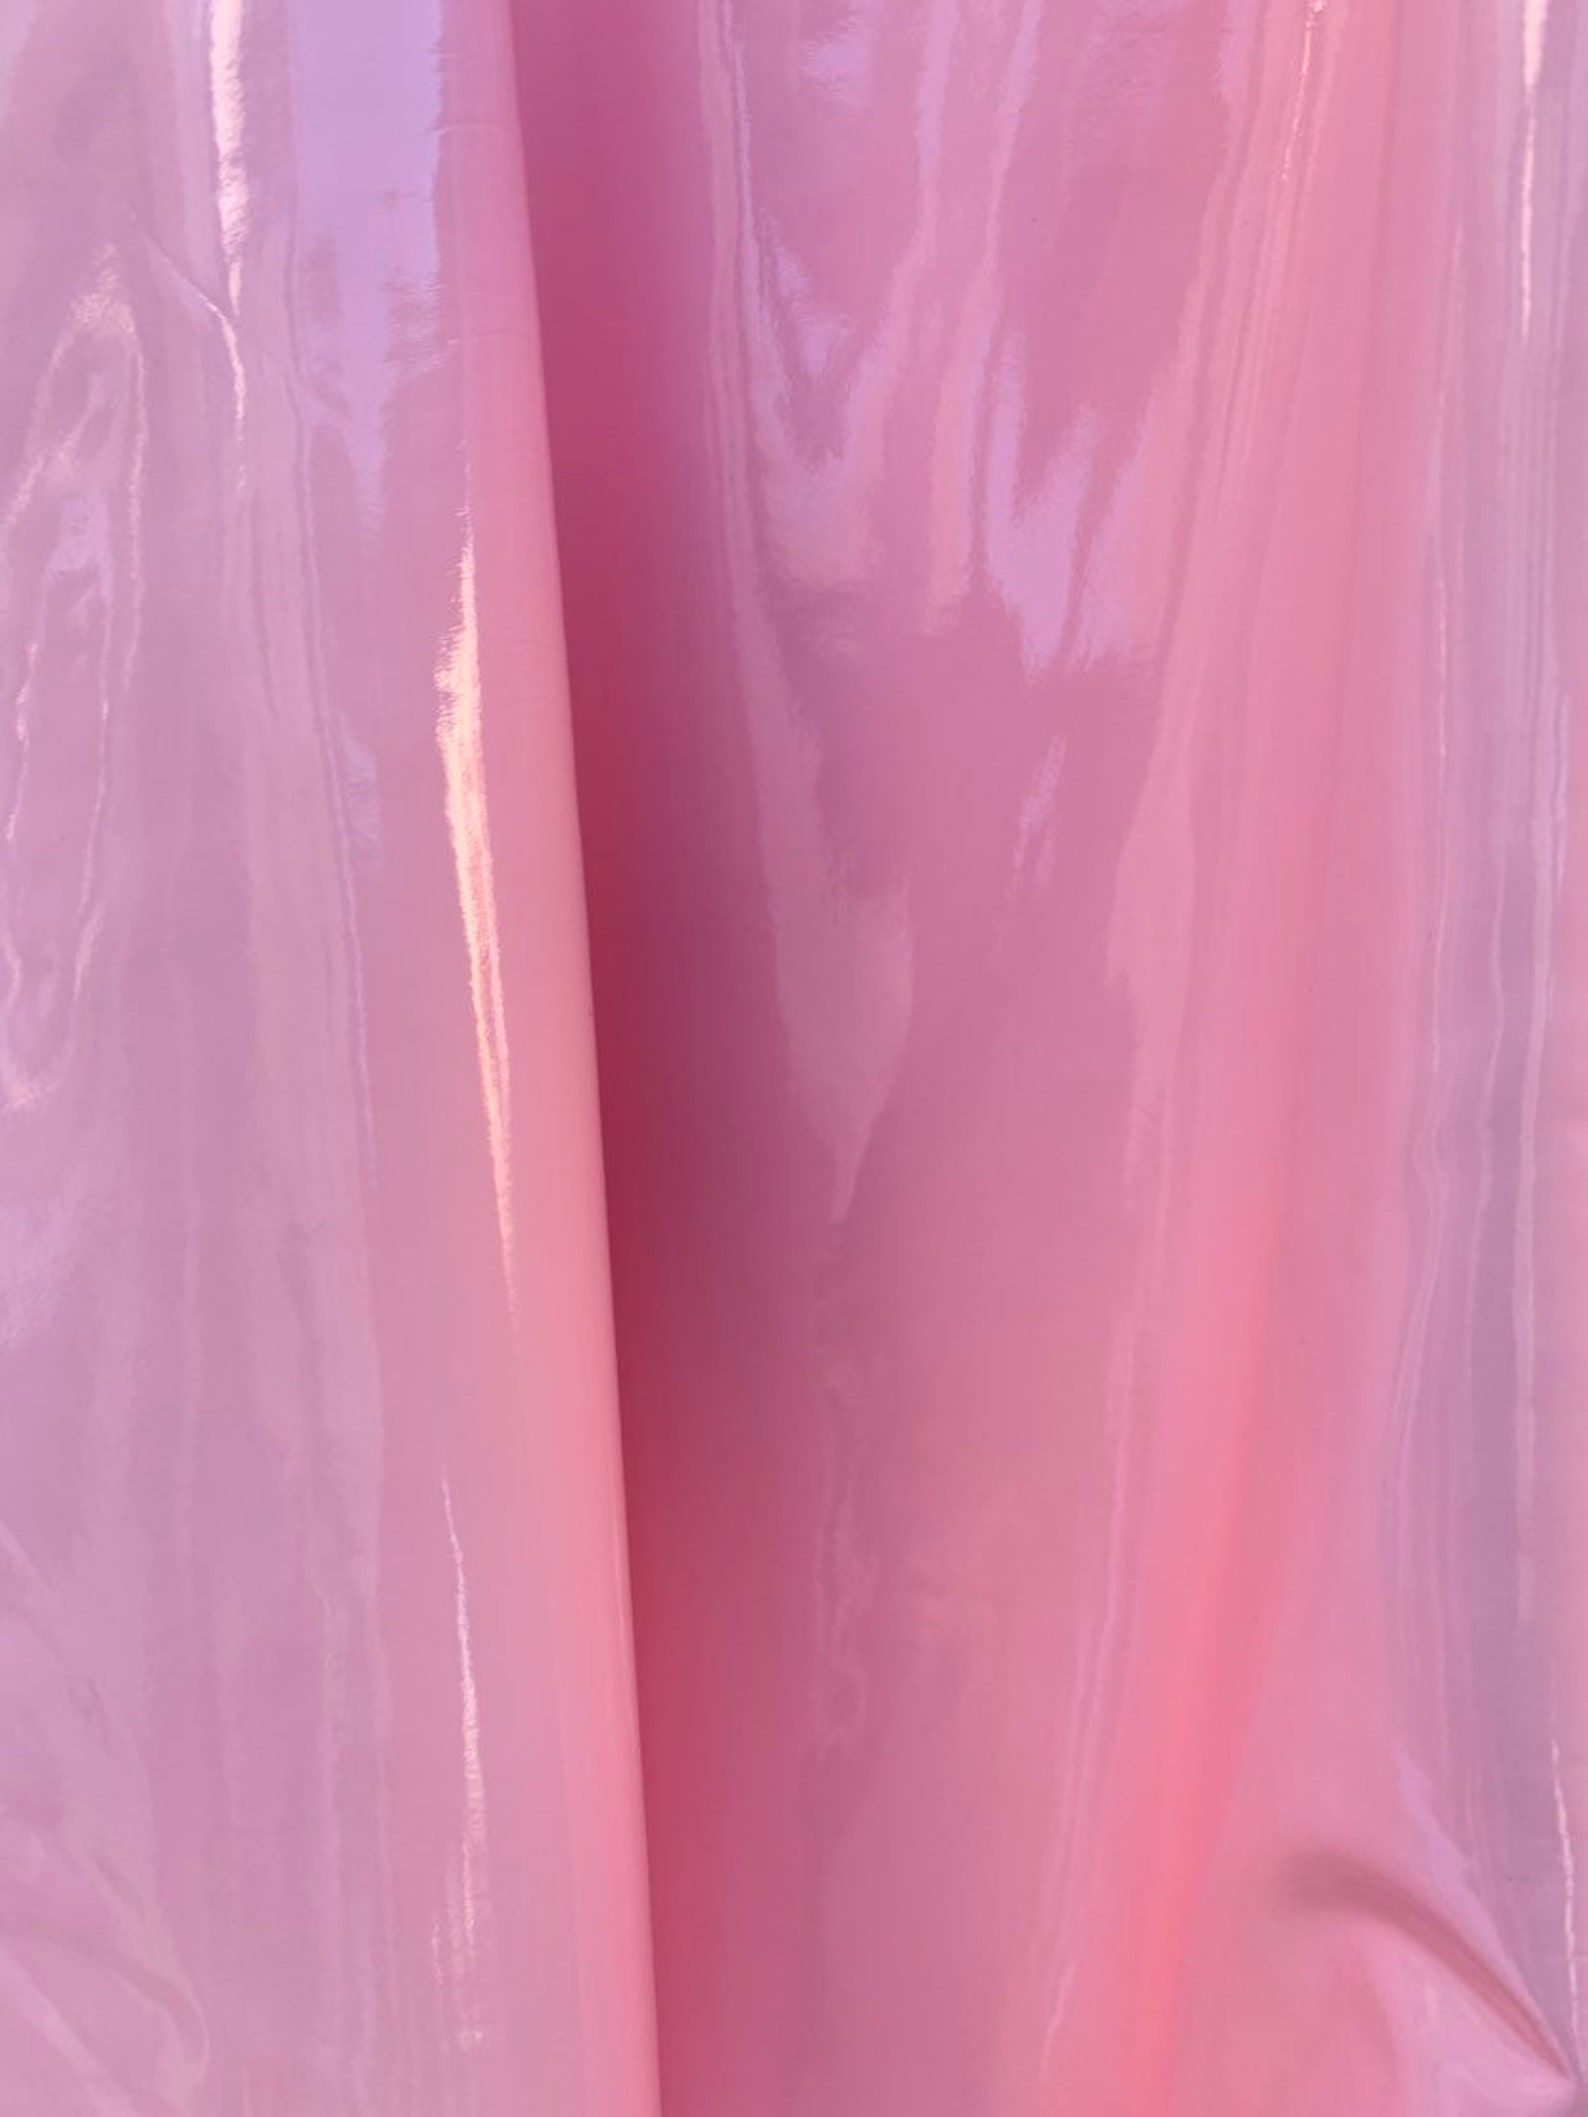 New Light Pink 4 way stretch latex foil spandex 60 wide | Etsy